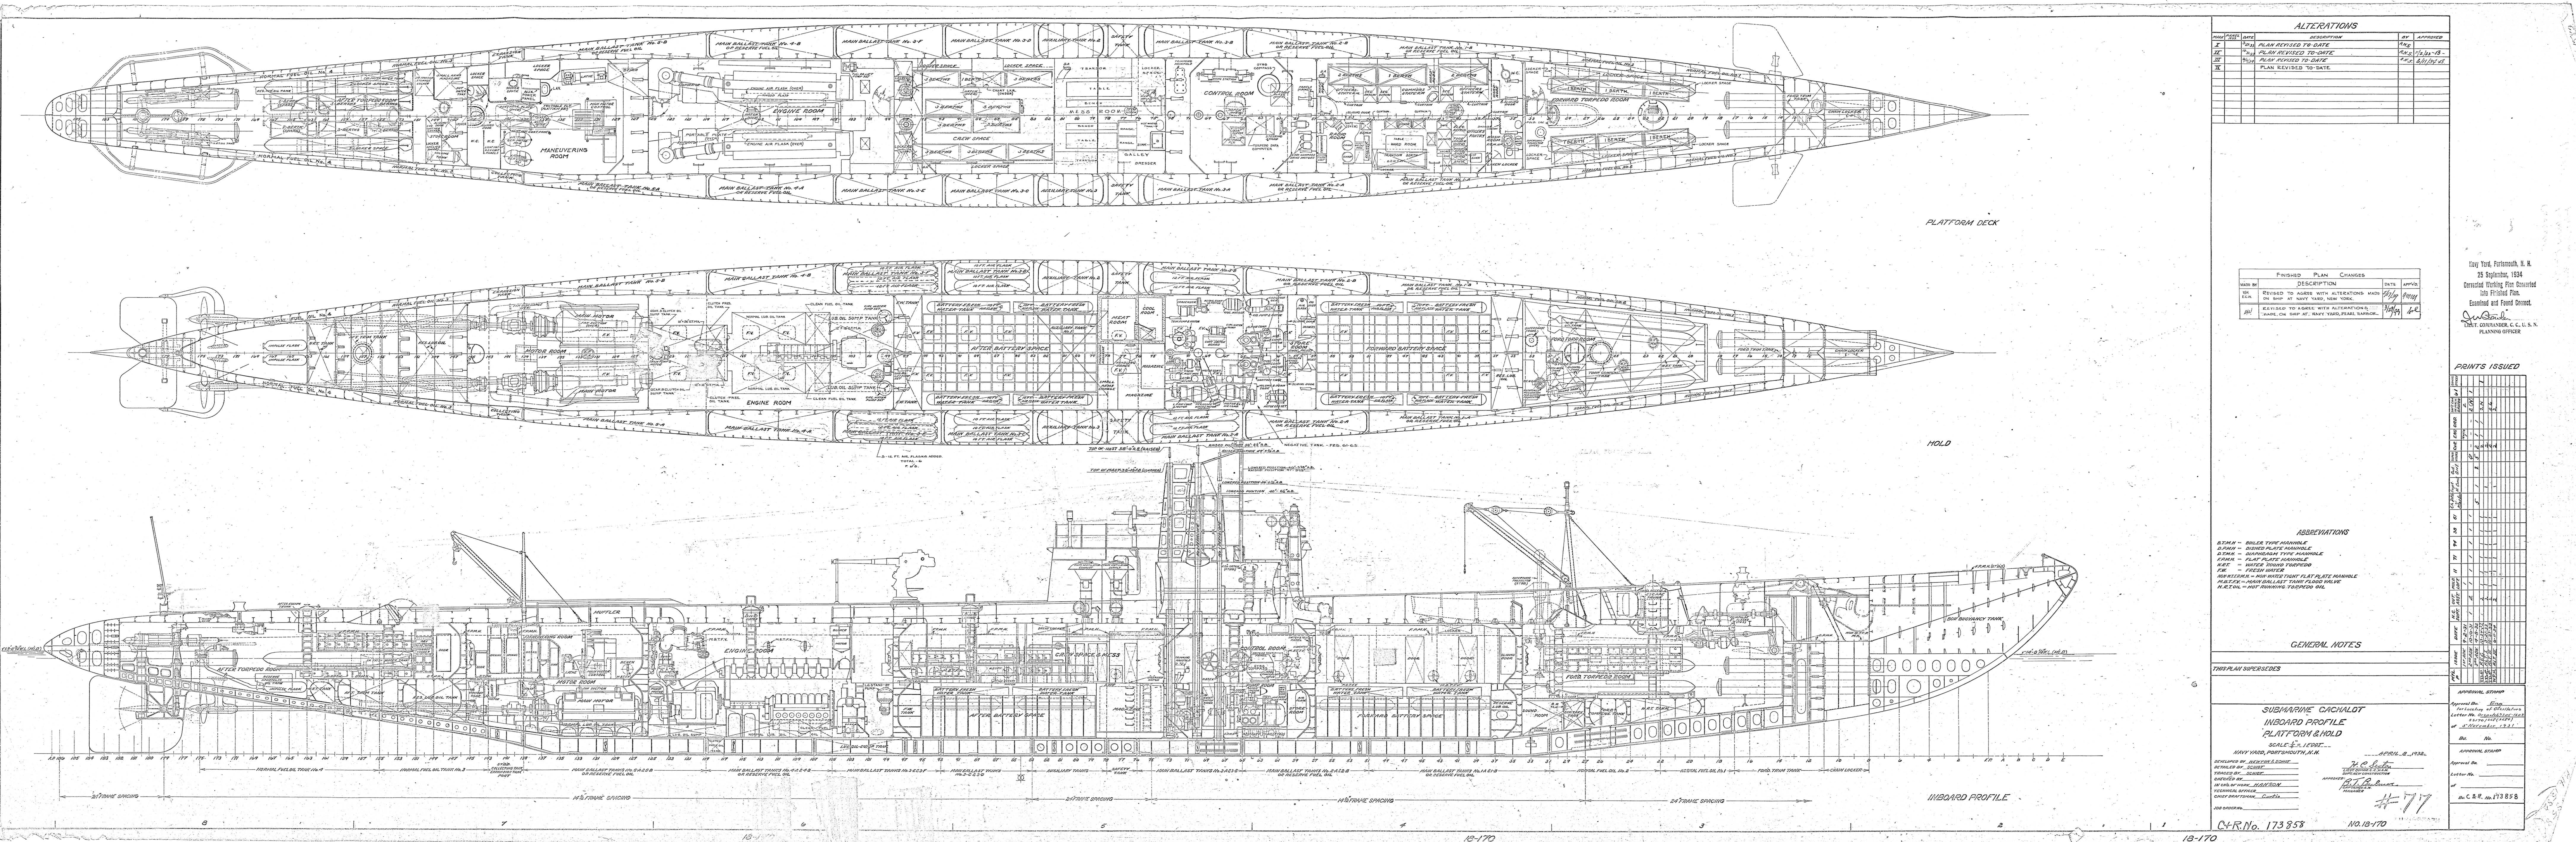 Plans adapted by Jim Christley for Maritime.org, downloaded via Internet Archive.